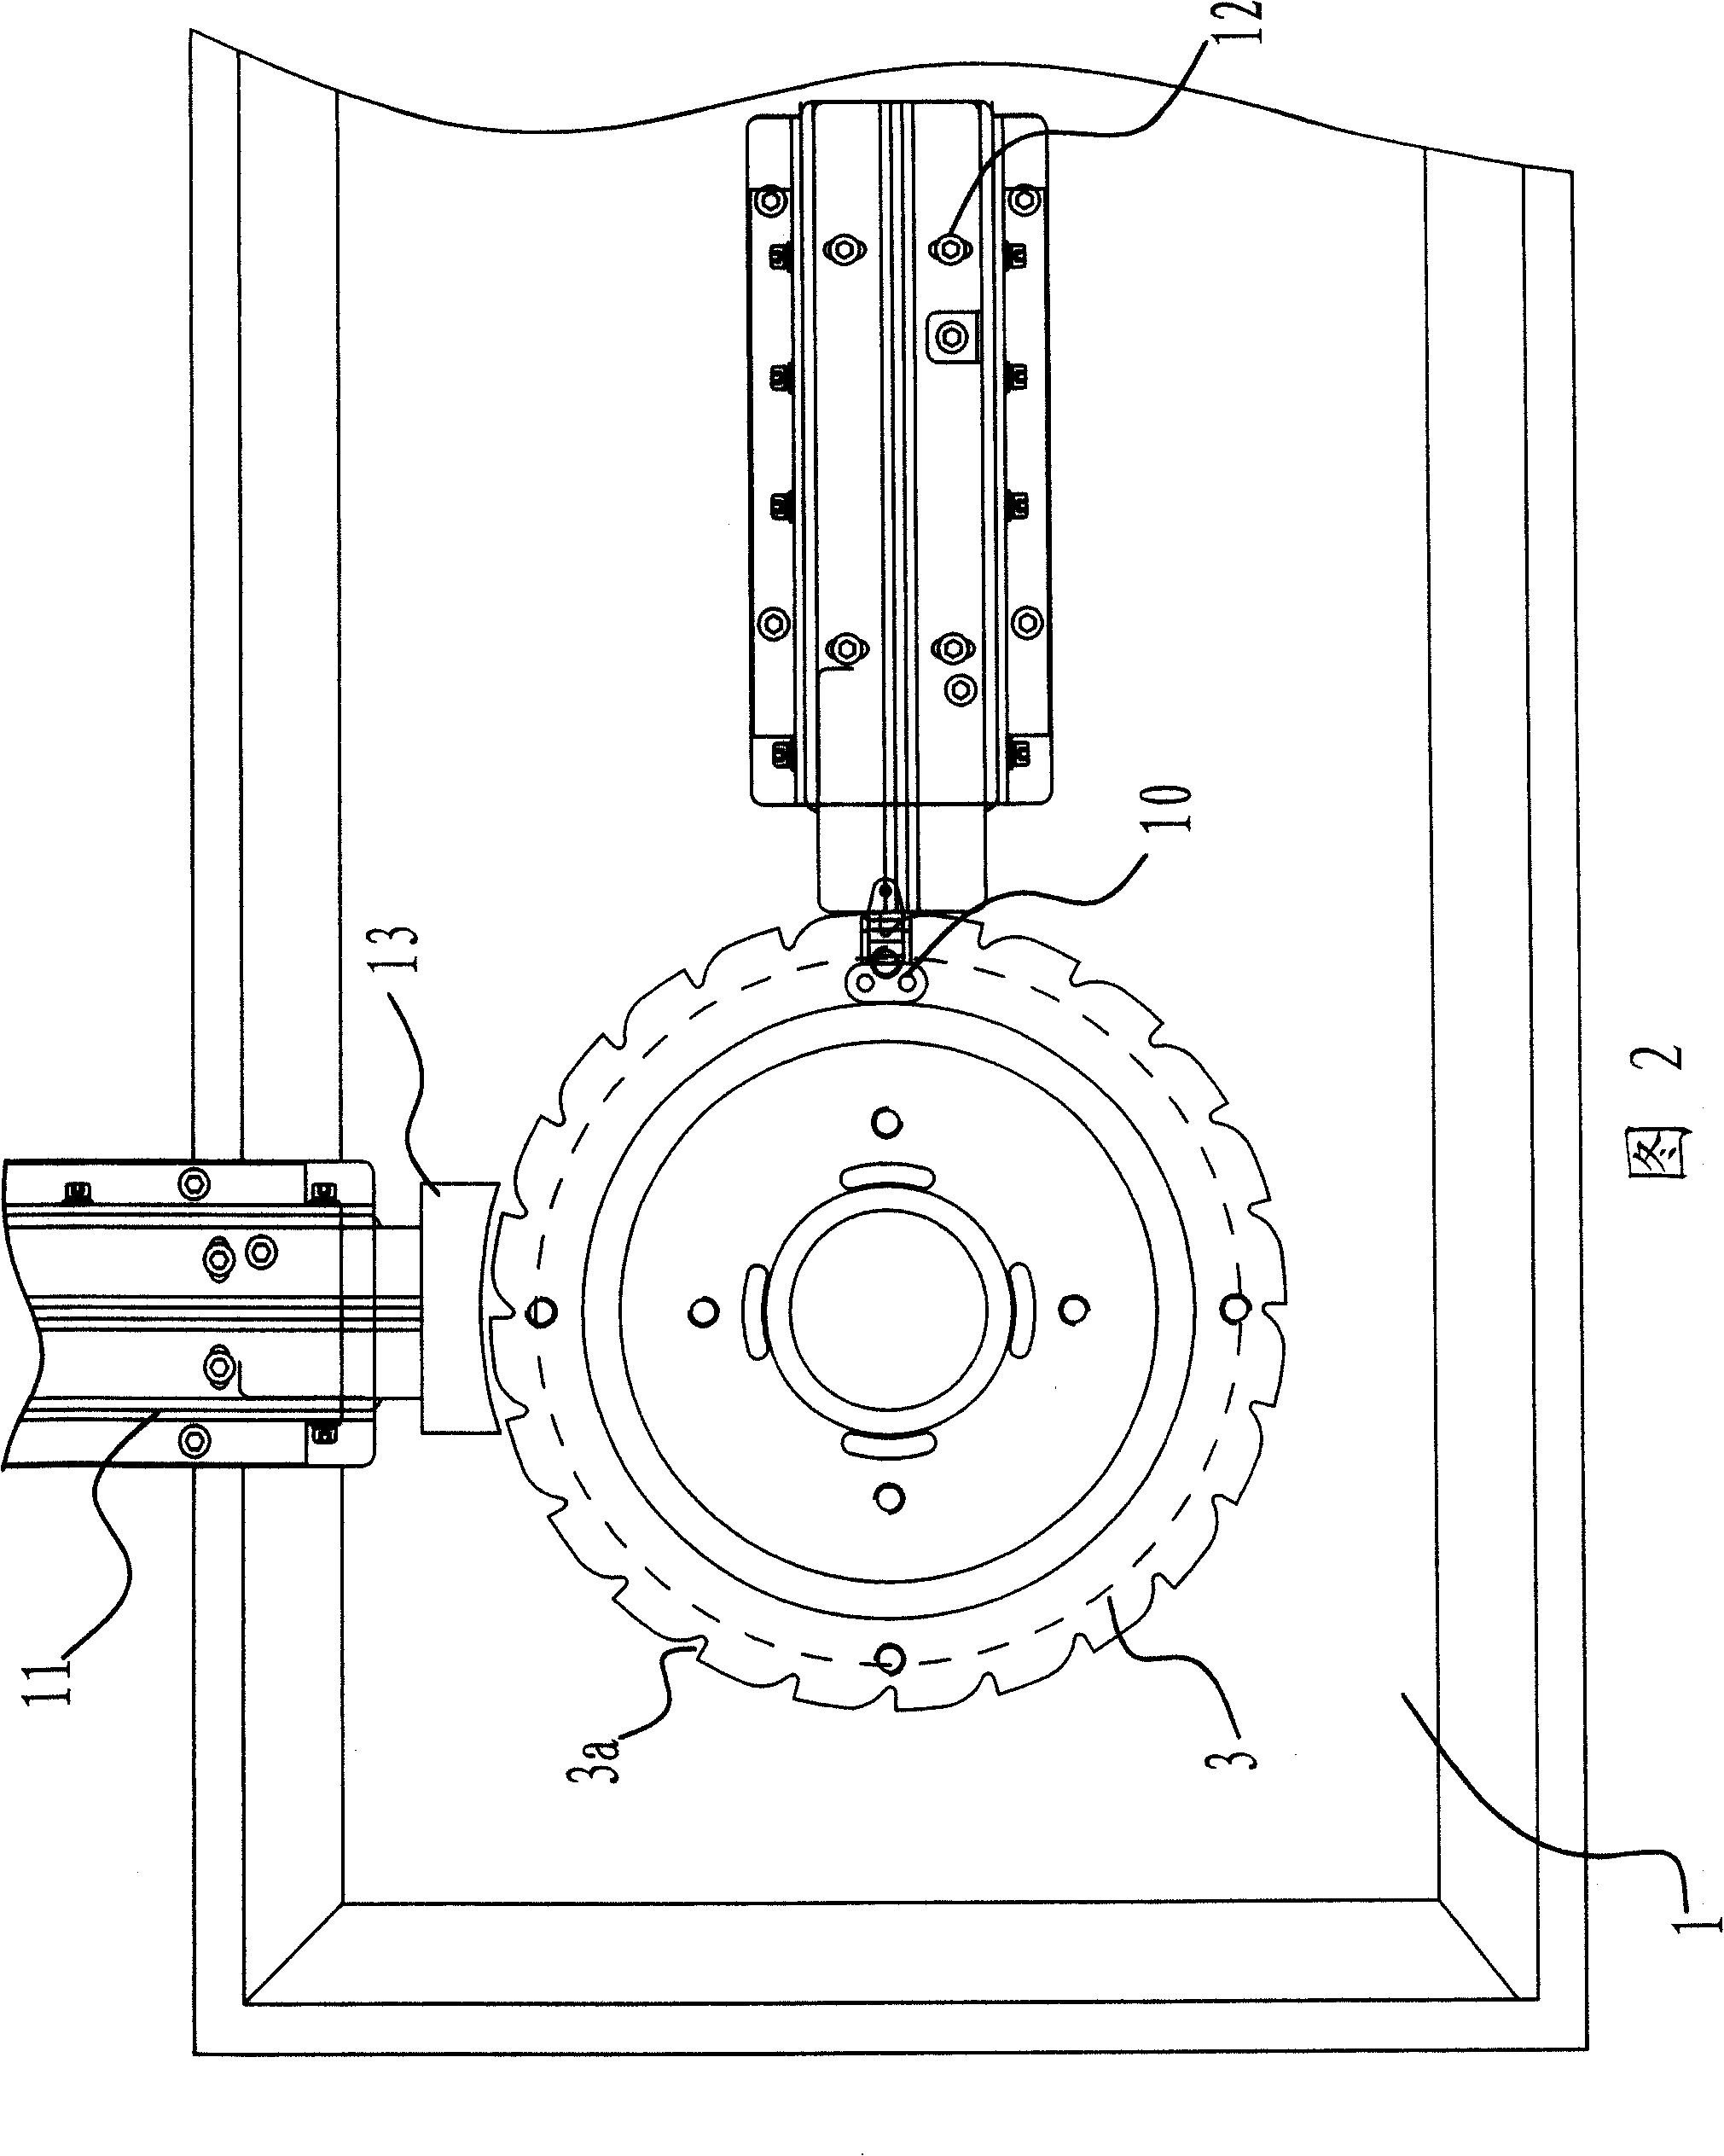 Mounting device for transfusion filter assembling machine